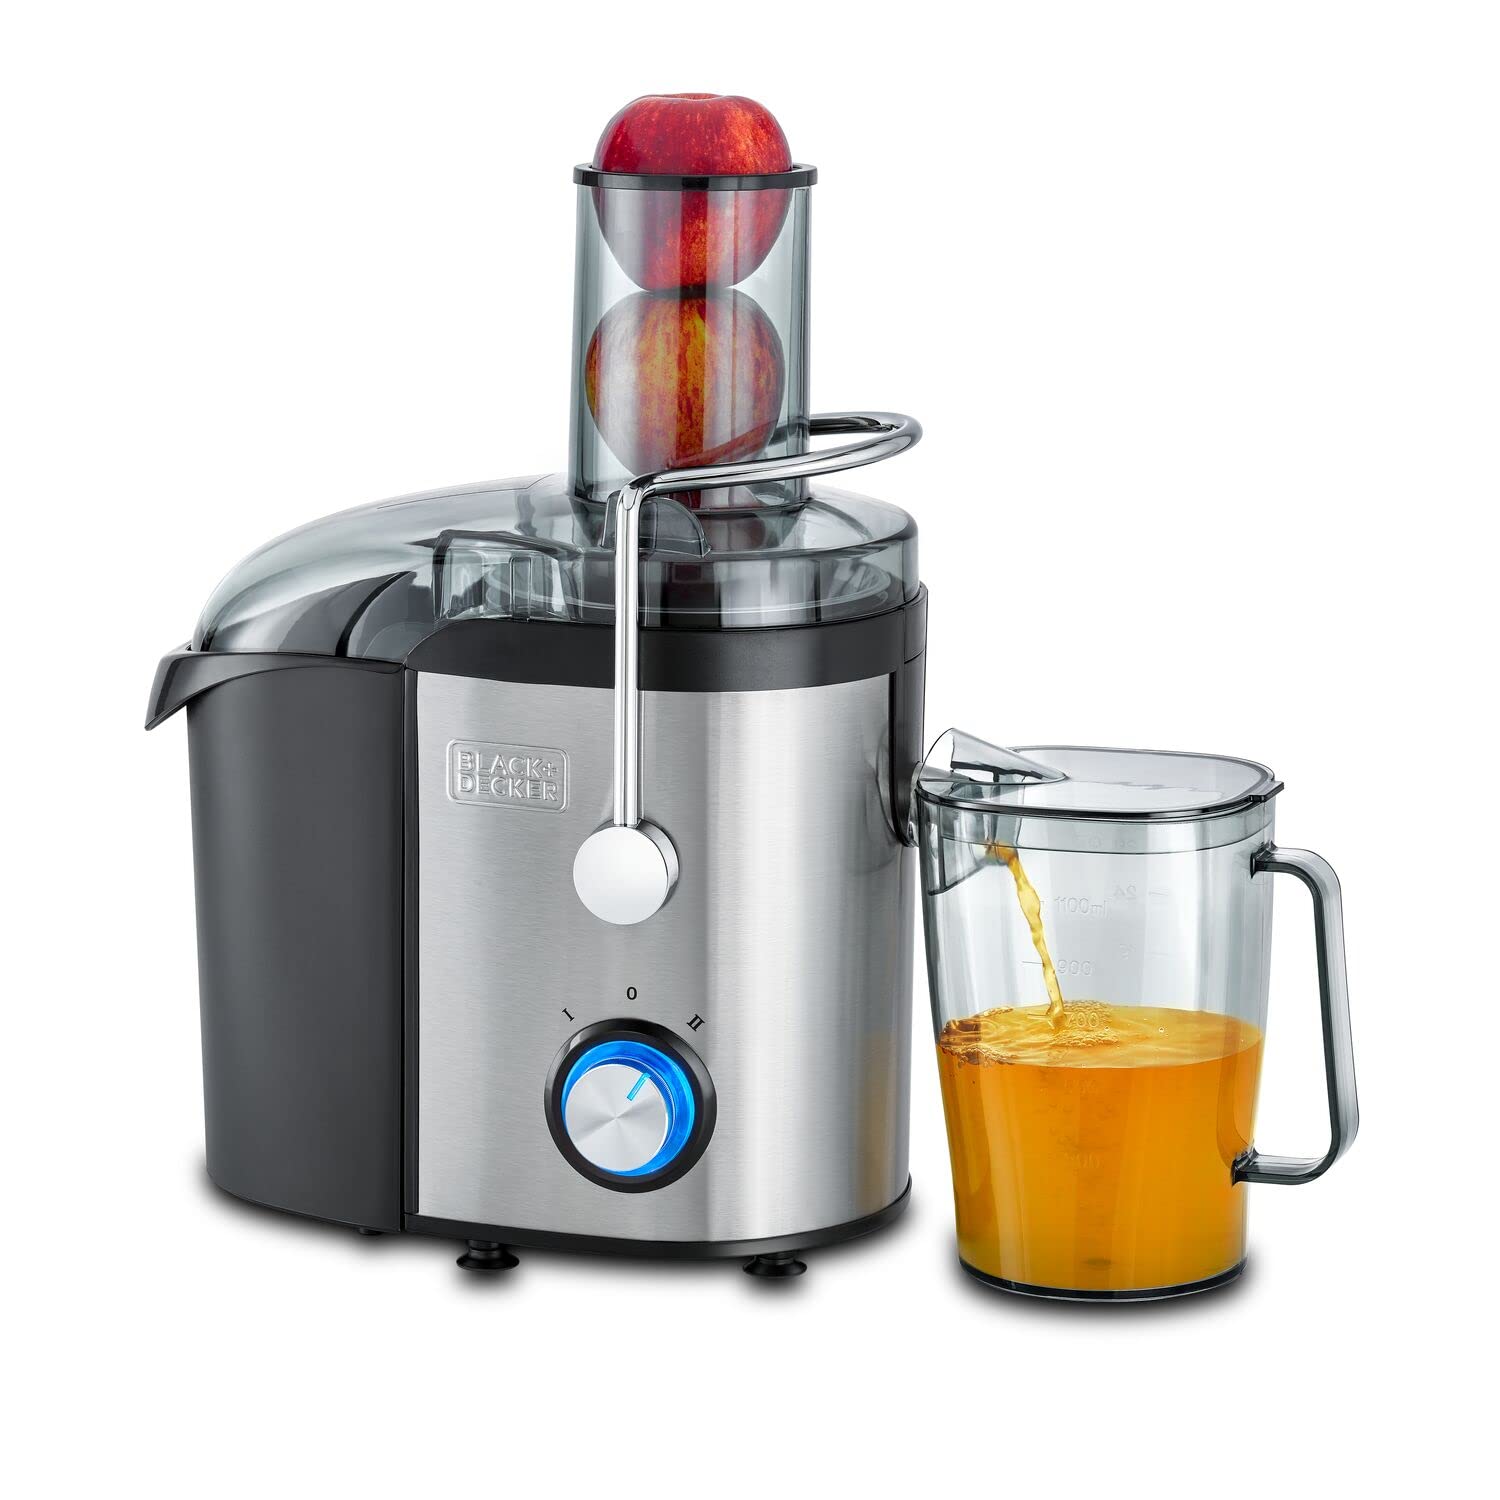 BLACK+DECKER 800W 75mm Juice Extractor XL Stainless Steel Body, For Juicing Fruits/Vegetables JE800-B5